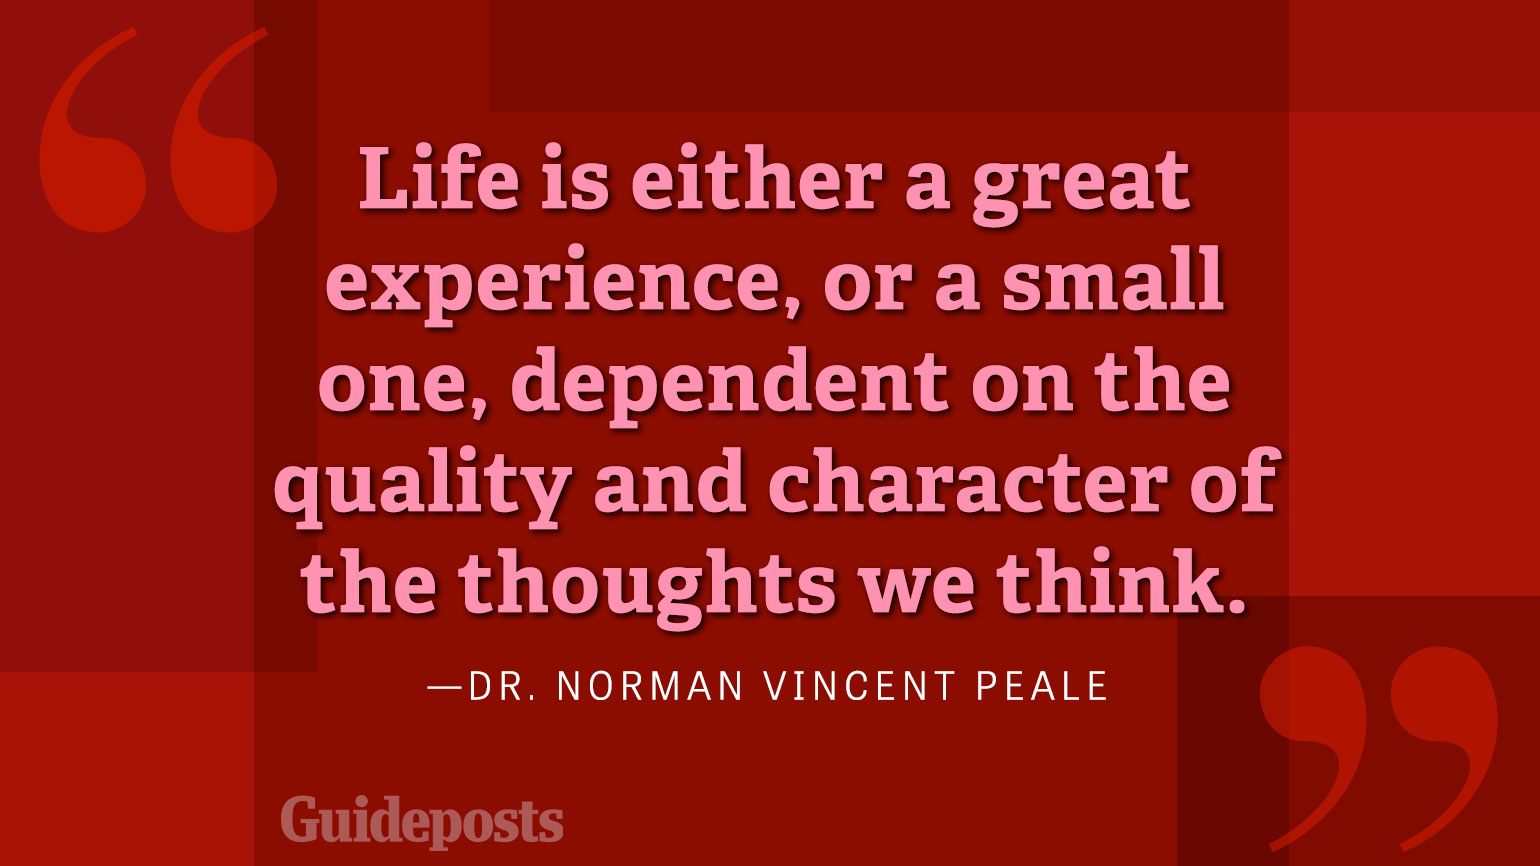 Life is either a great experience, or a small one, dependent on the quality and character of the thoughts we think.